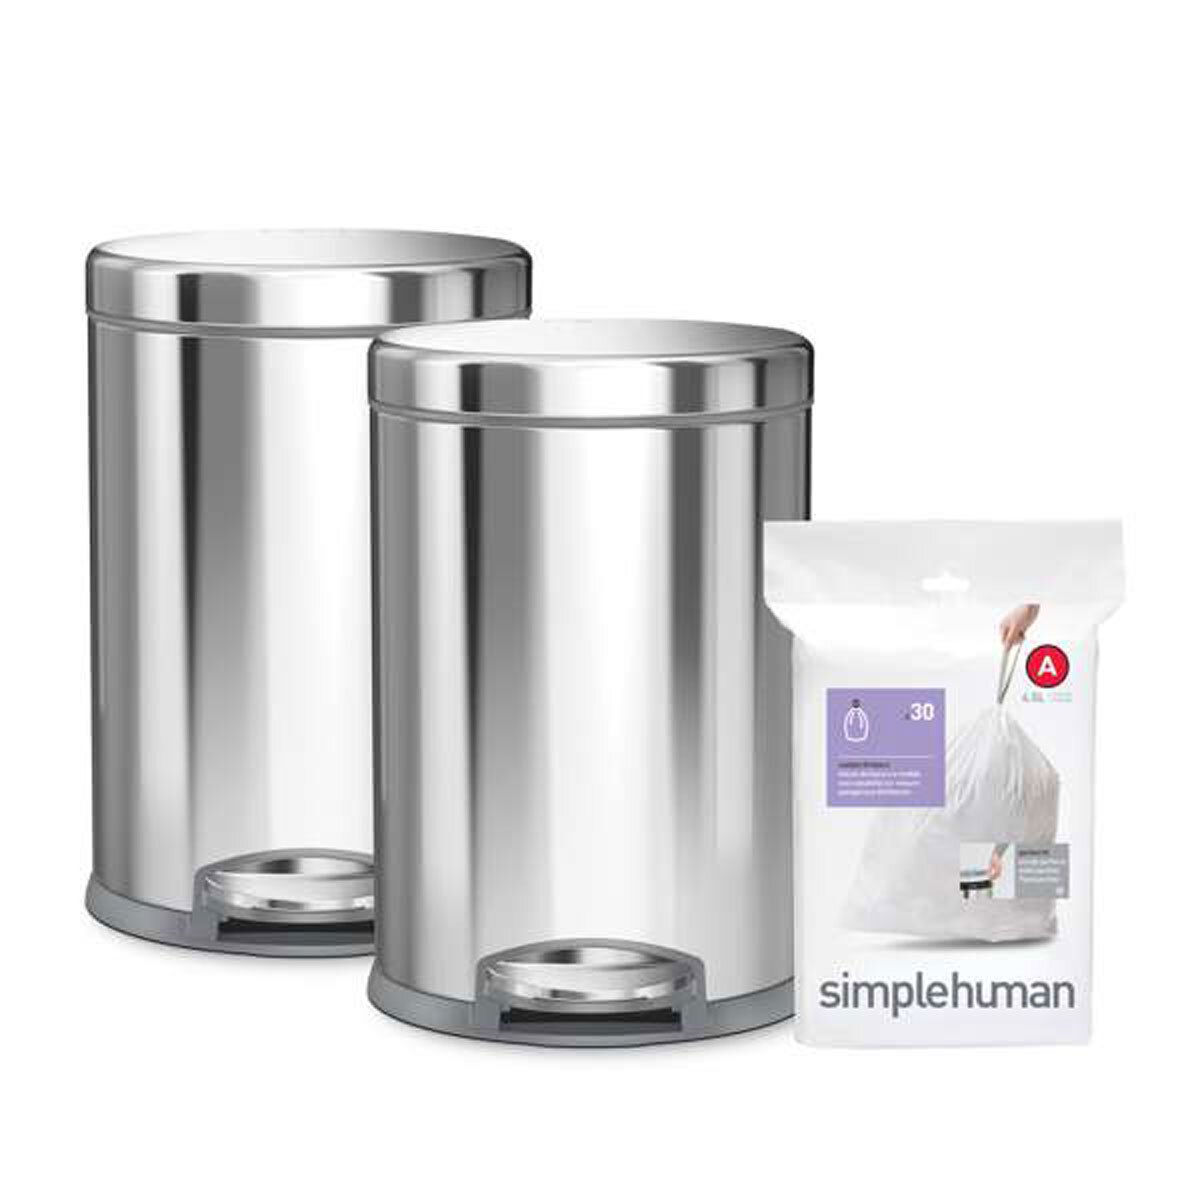 4.5L round bin twin pack with liners